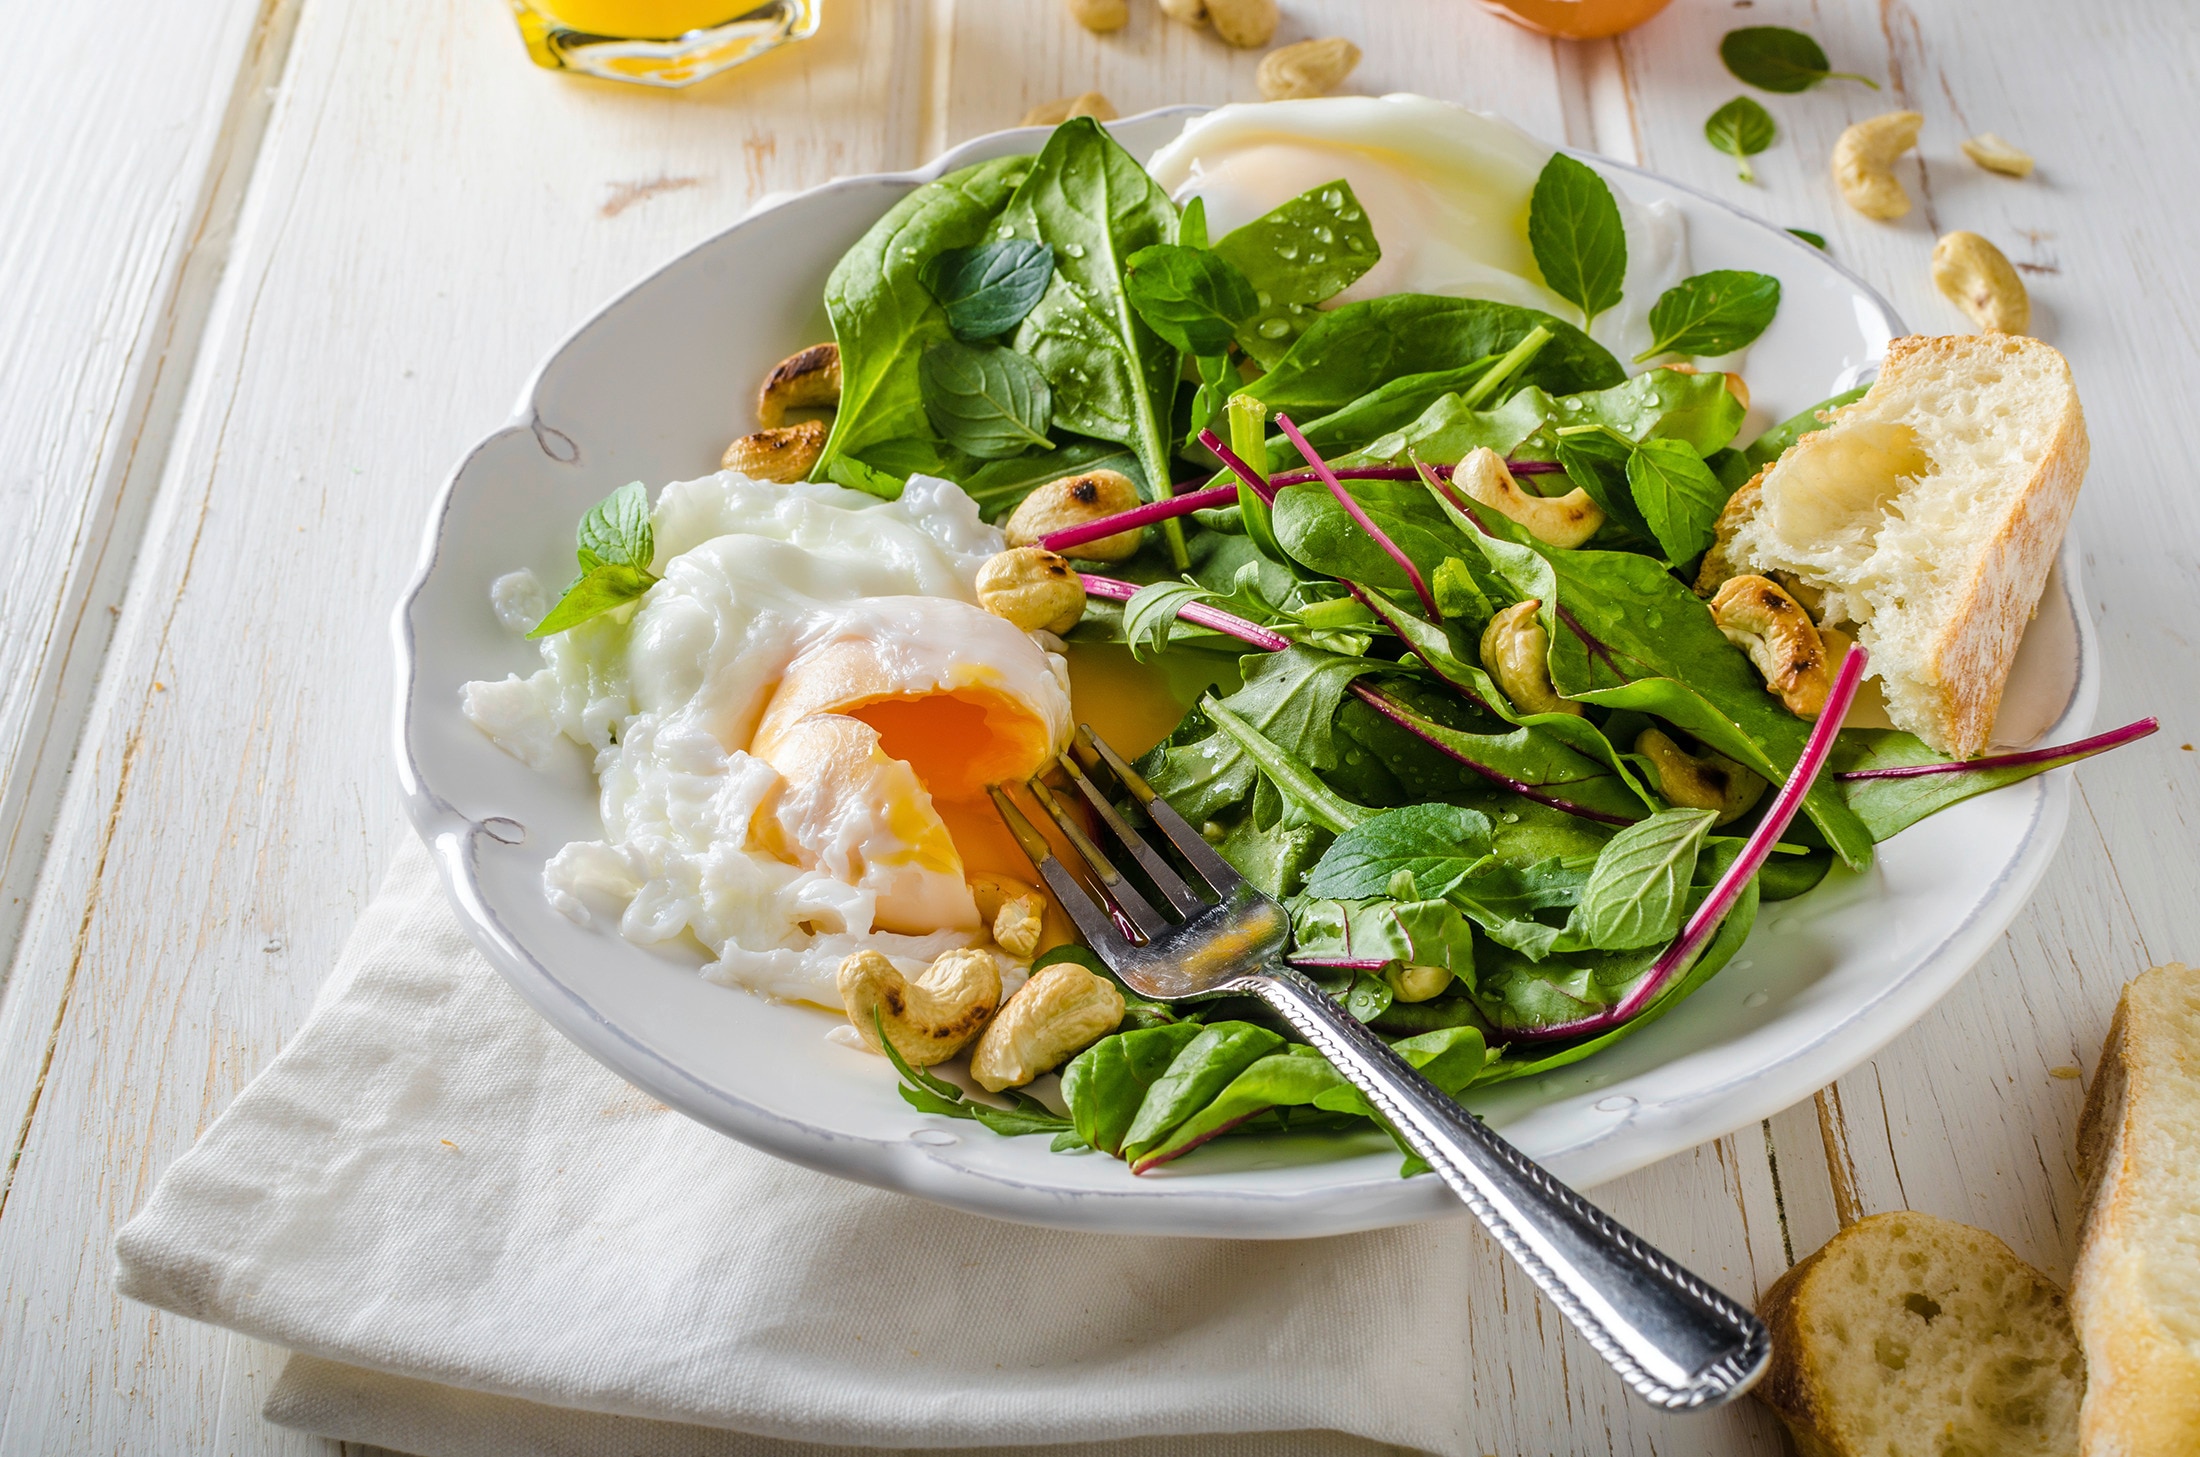 A fresh green salad with roasted cashews, a fried egg, and bread